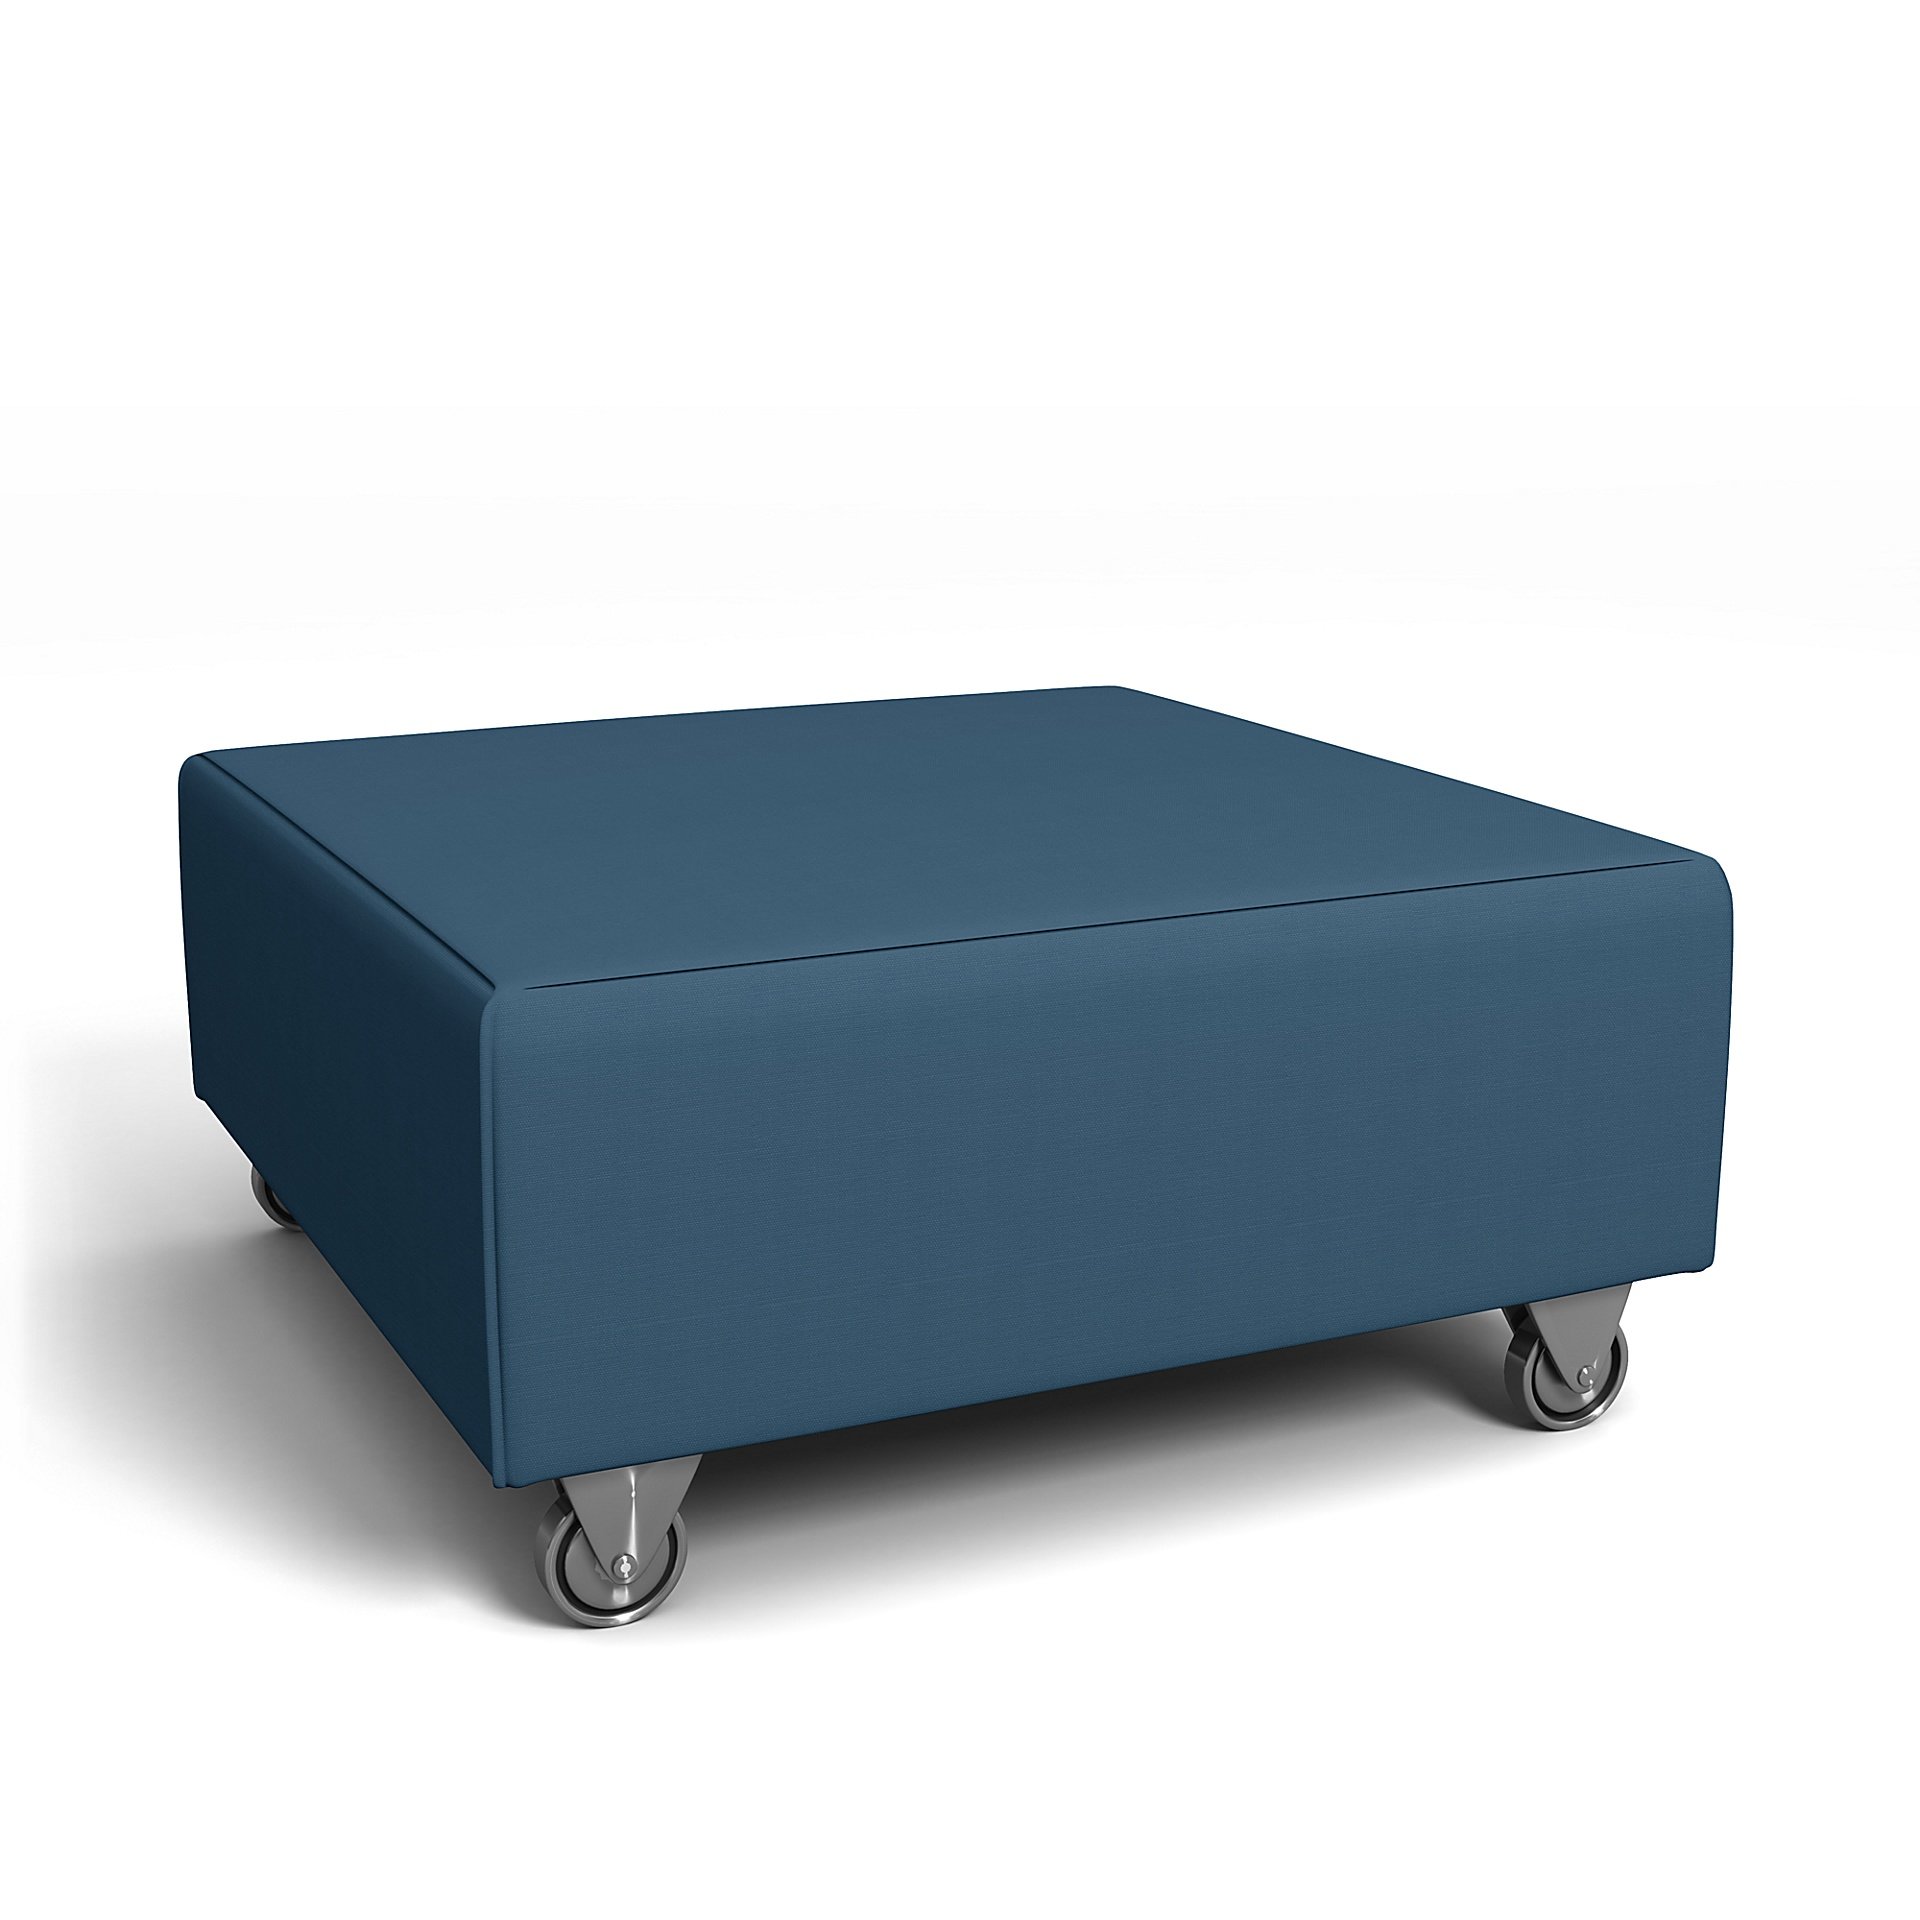 IKEA - Falsterbo Footstool Cover, Real Teal, Cotton - Bemz